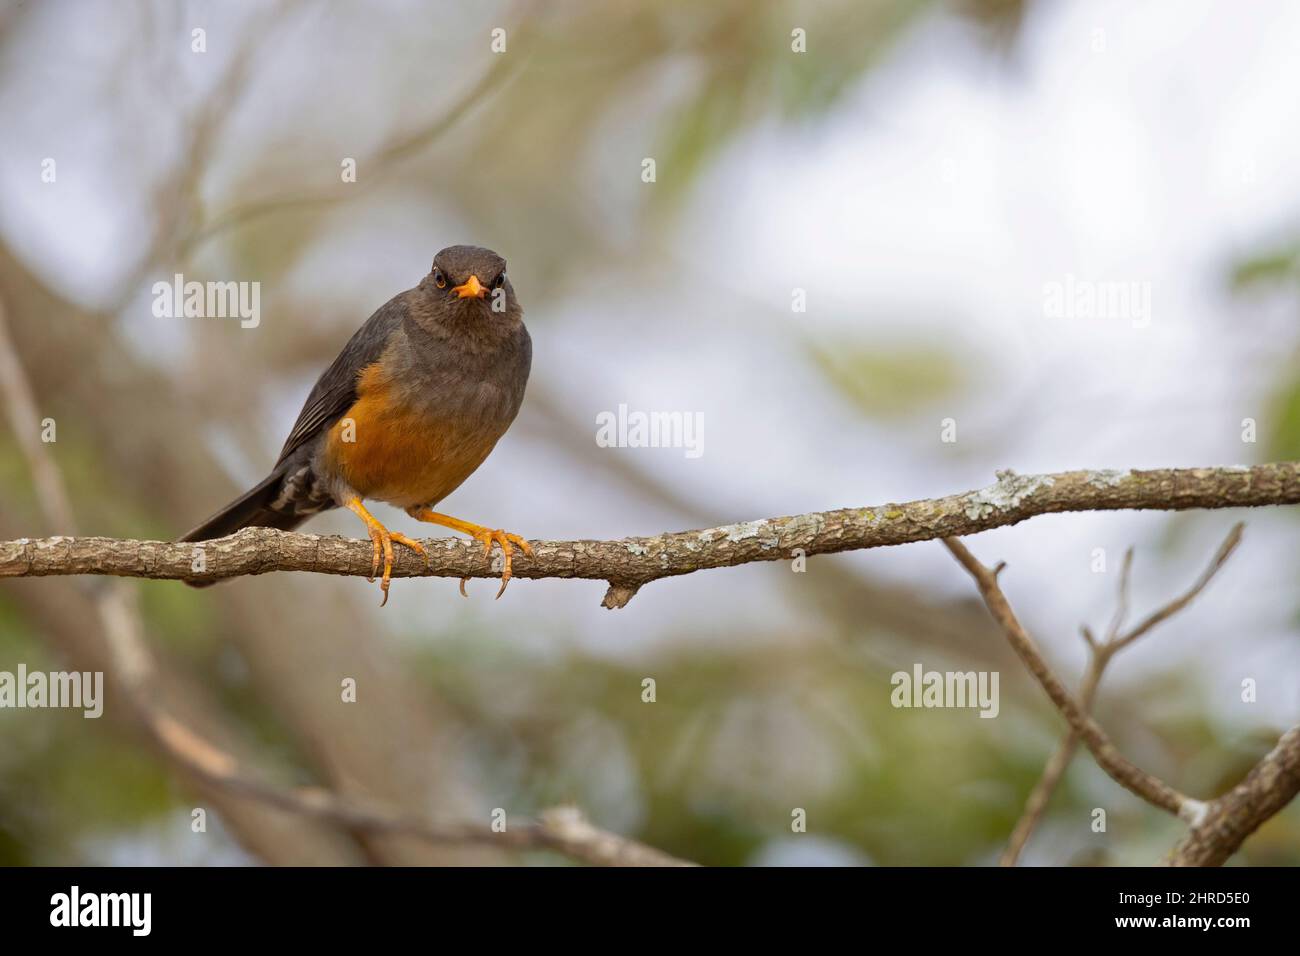 An abyssinian thrush (Turdus abyssinicus) perched on a branch of a tree. Stock Photo